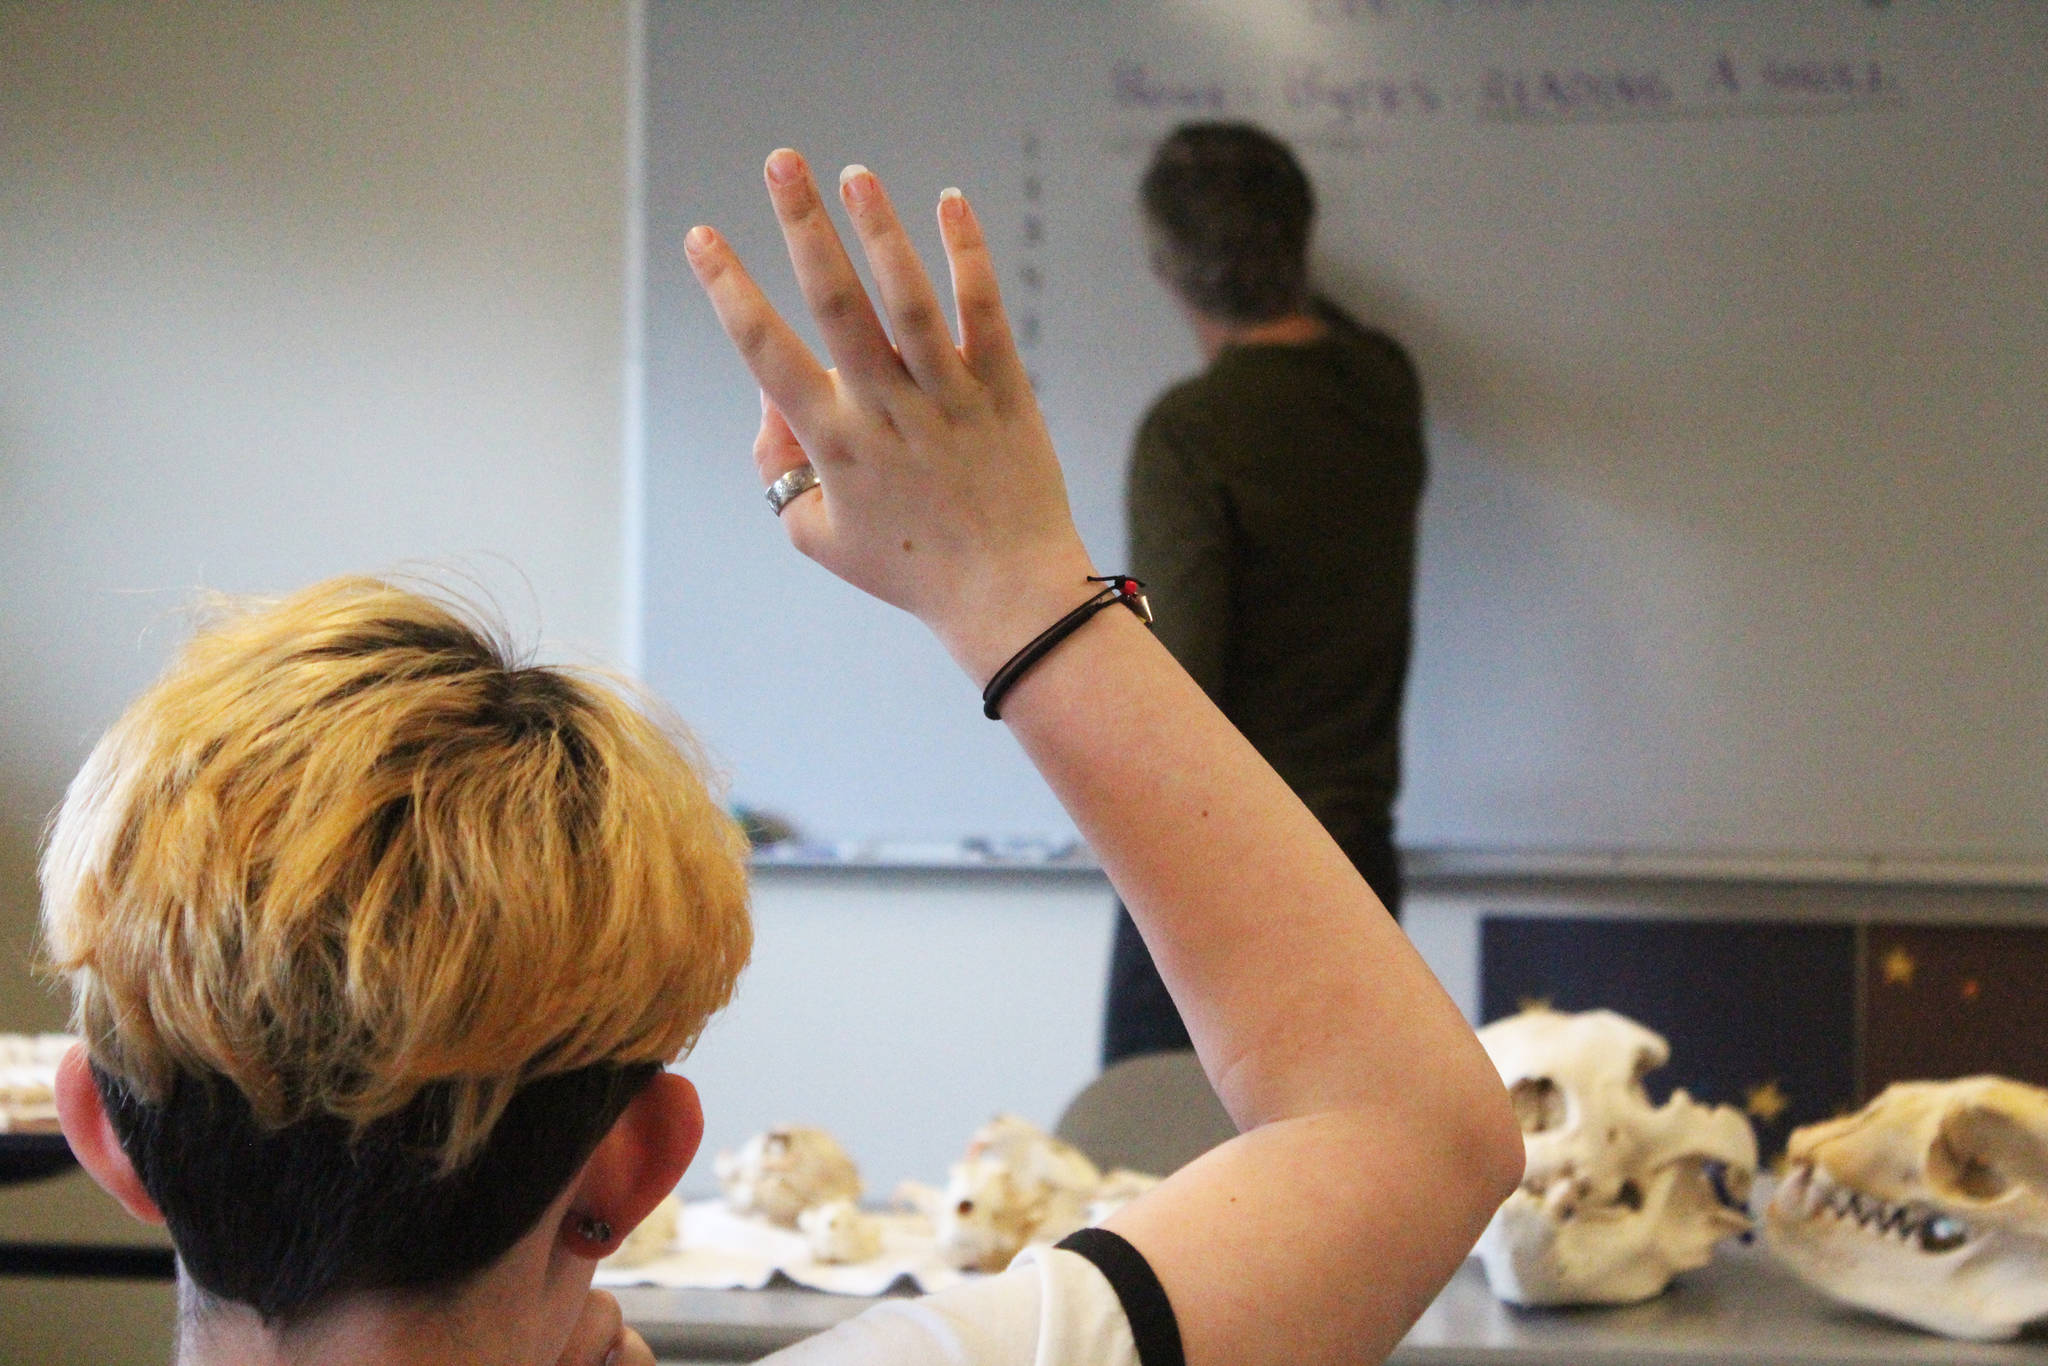 A sixth grade student from West Homer Elementary School raises their hand during a presentation from Lee Post, who teaches skeletal articulation at Kachemak Bay Campus, on Friday, April 5, 2019 during the Kids2College program at the college in Homer, Alaska. (Photo by Megan Pacer/Homer News)